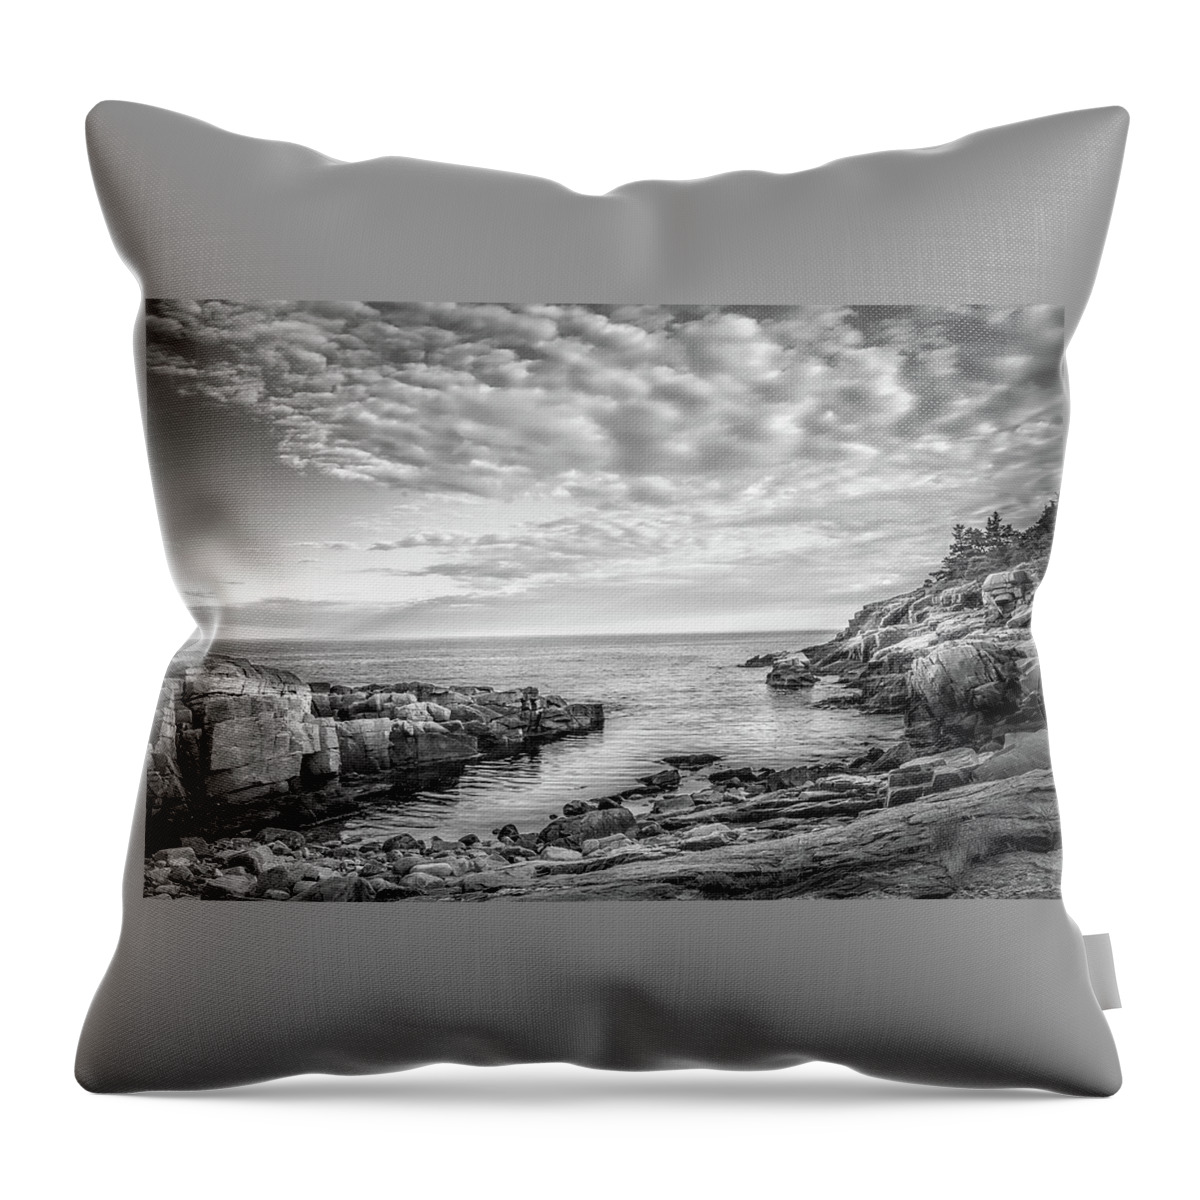 Black & White Throw Pillow featuring the photograph Acadia Coast by Brian Caldwell